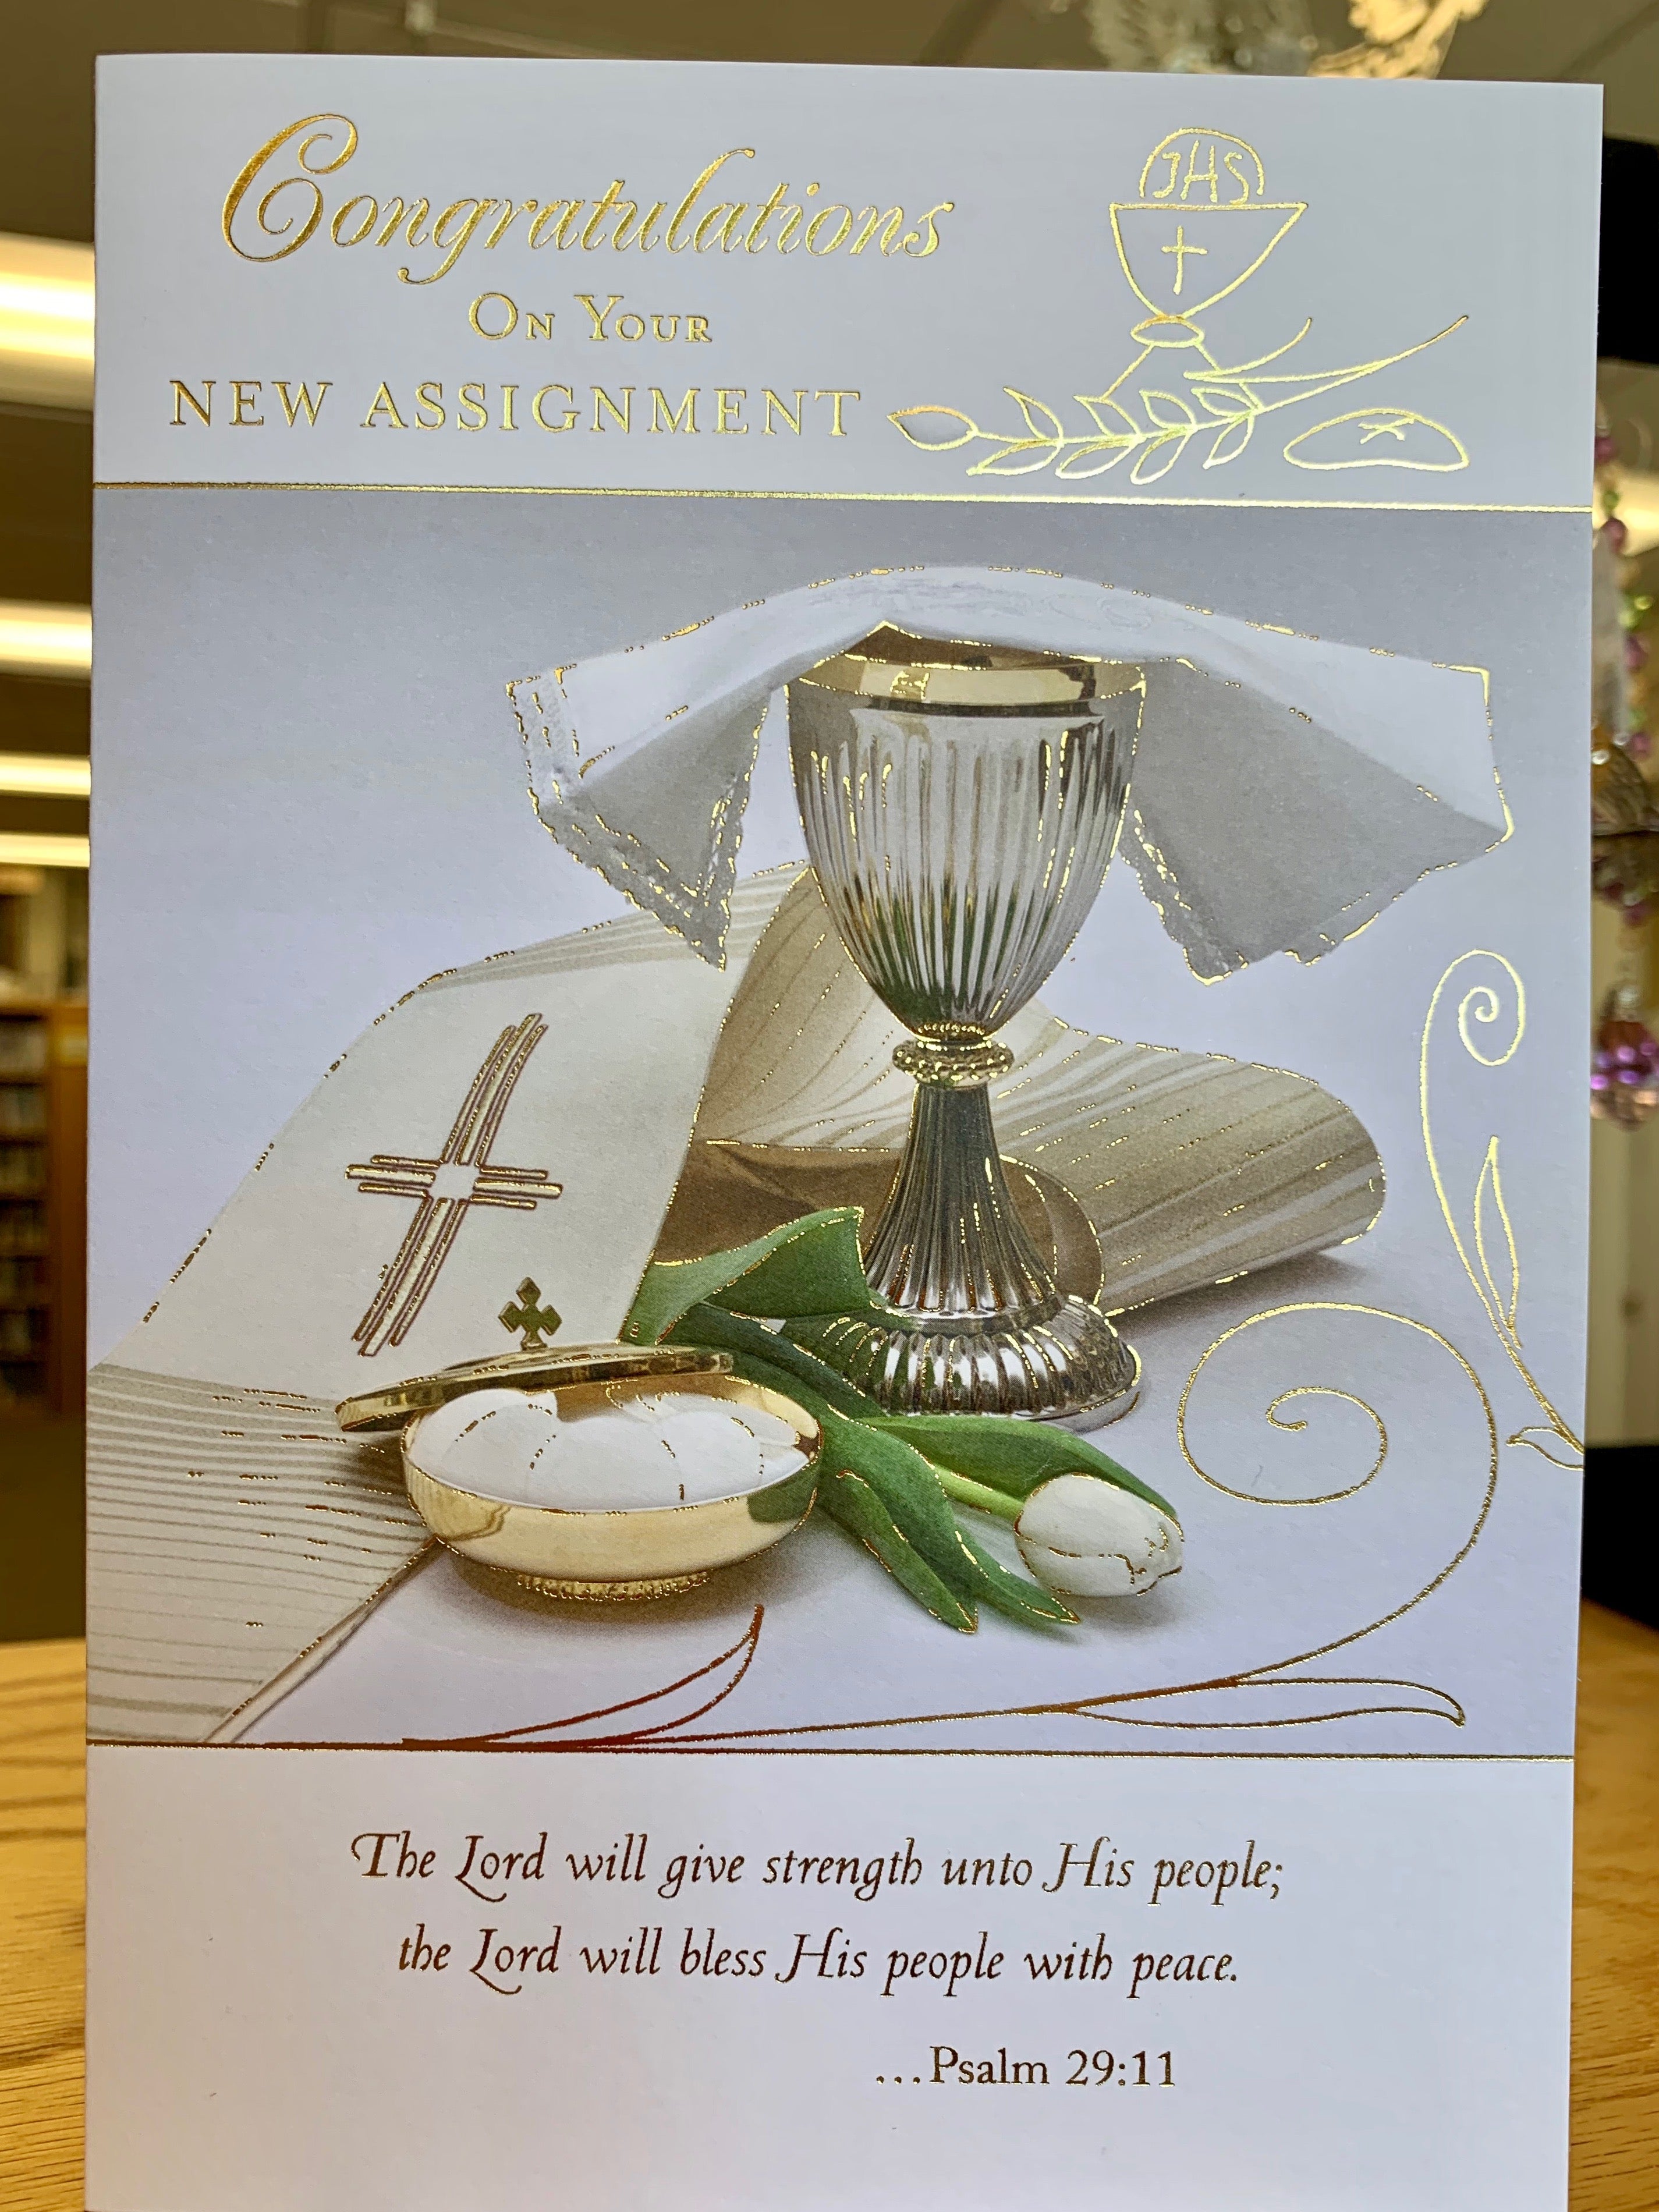 With Sincere Thanks for Your Priestly Ministry: Priest Appreciation Card